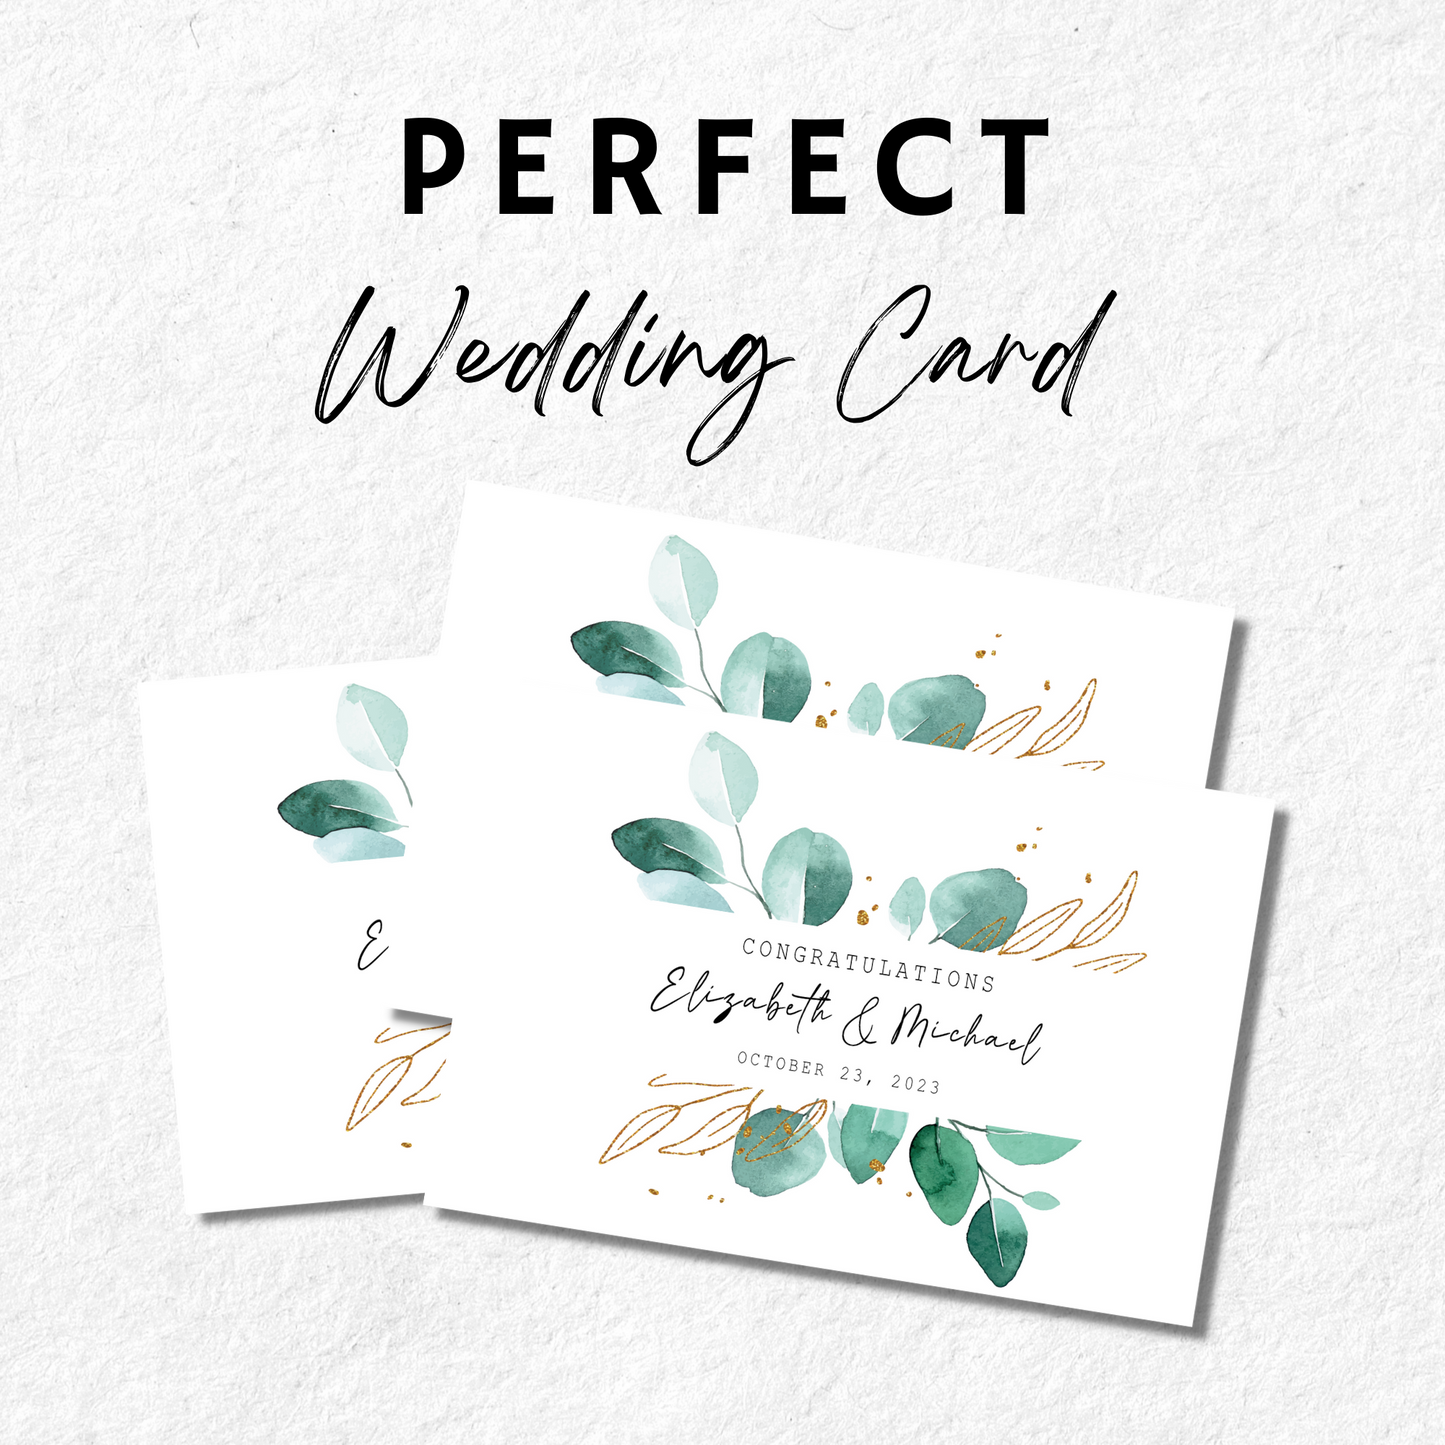 Wedding Greeting Card for the Newlywed